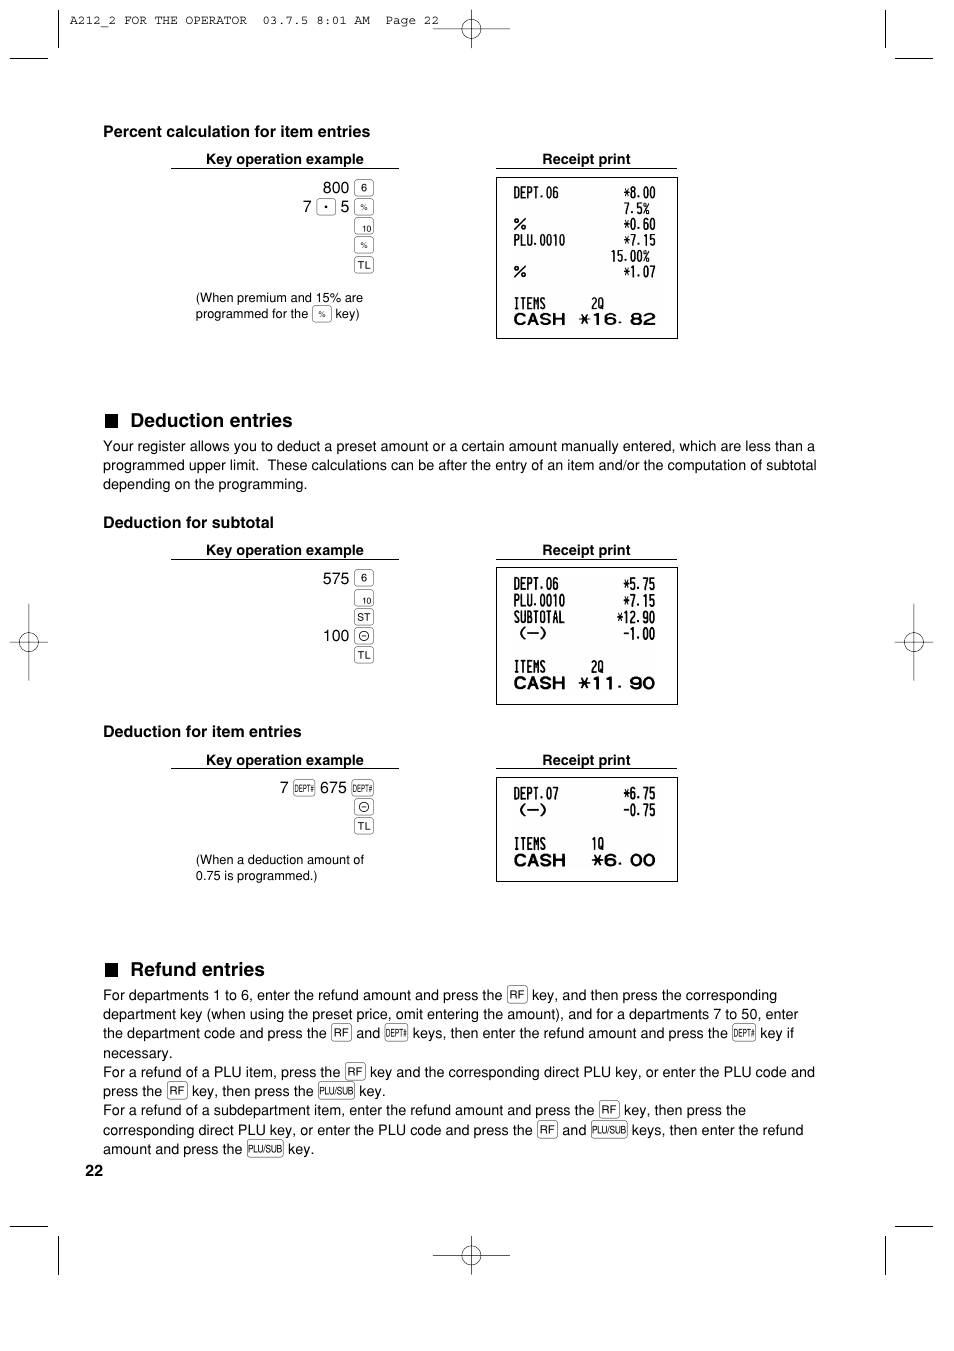 Sharp XE-A212 User Manual | Page 24 / 82